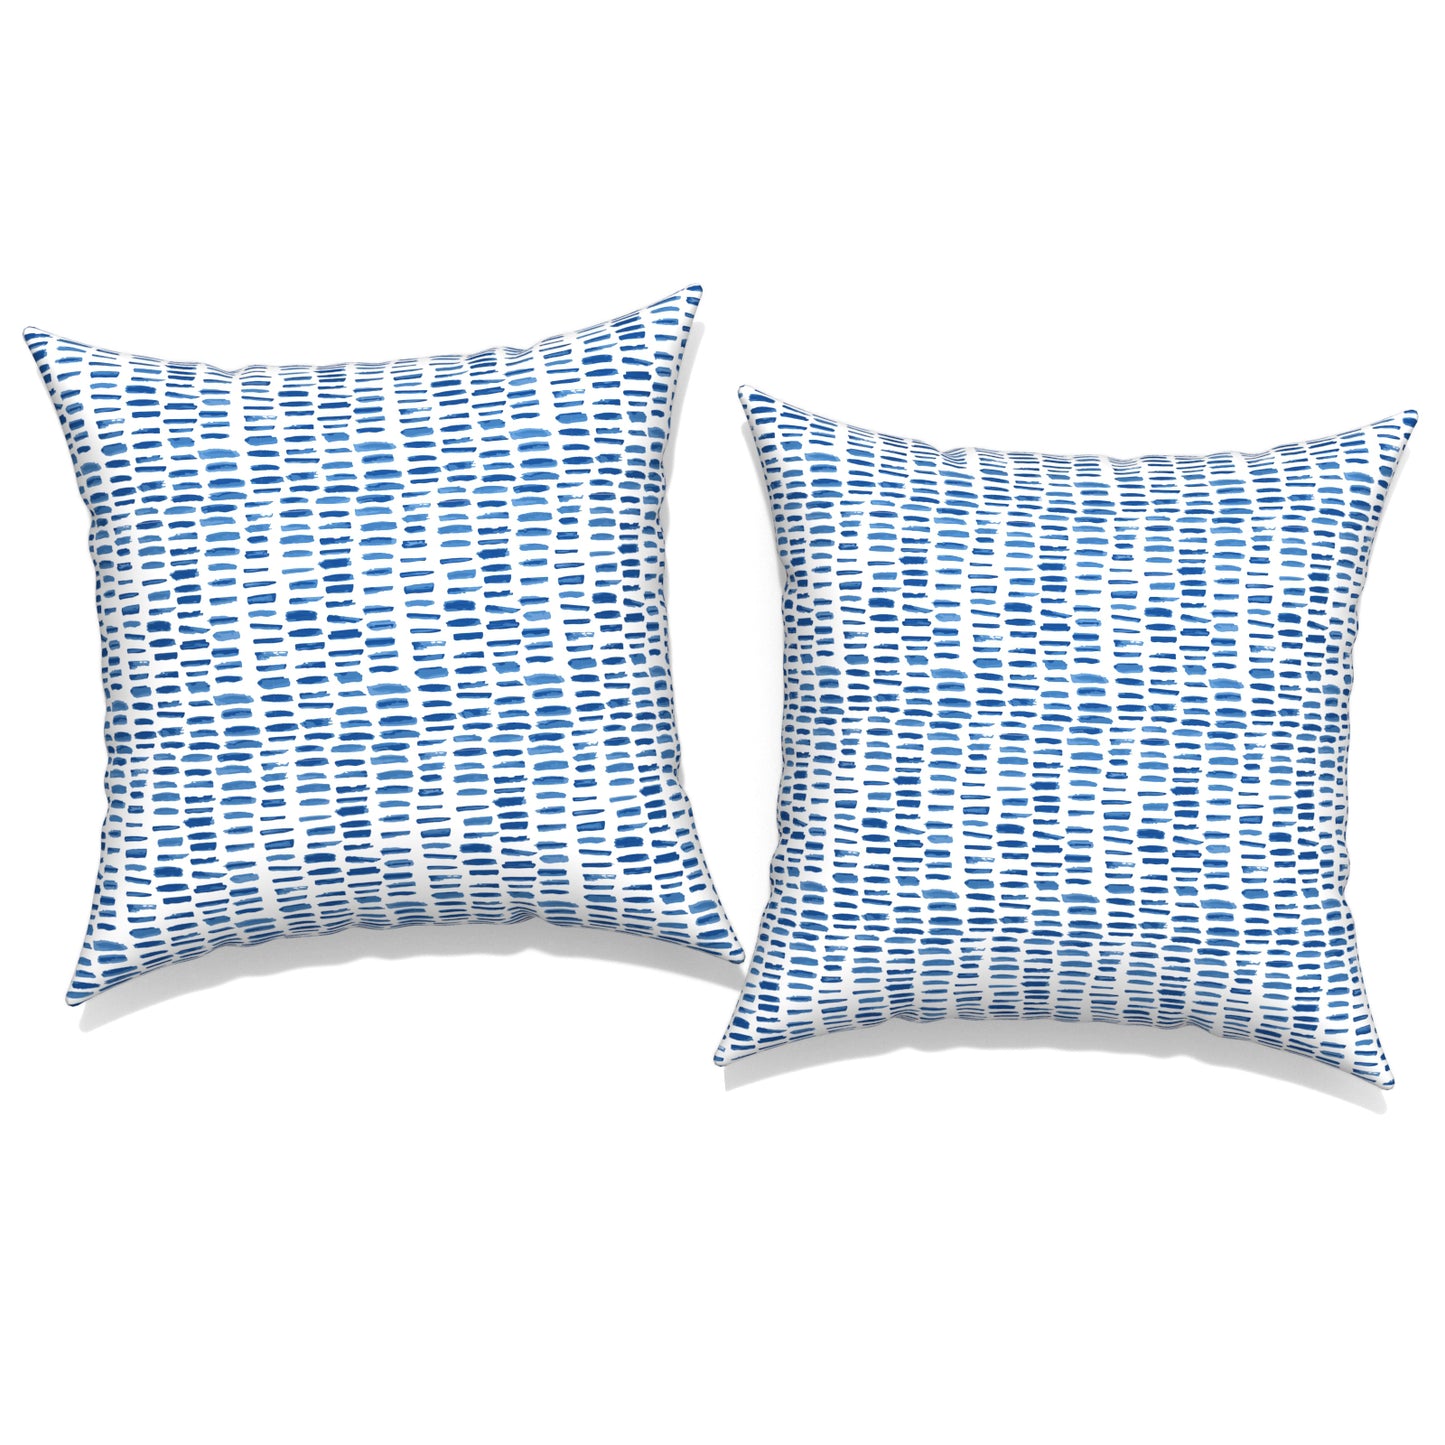 Melody Elephant Pack of 2 Patio Throw Pillow Covers ONLY, Water Repellent Cushion Cases 20x20 Inch, Square Pillowcases for Outdoor Couch Decoration, Pebble Blue